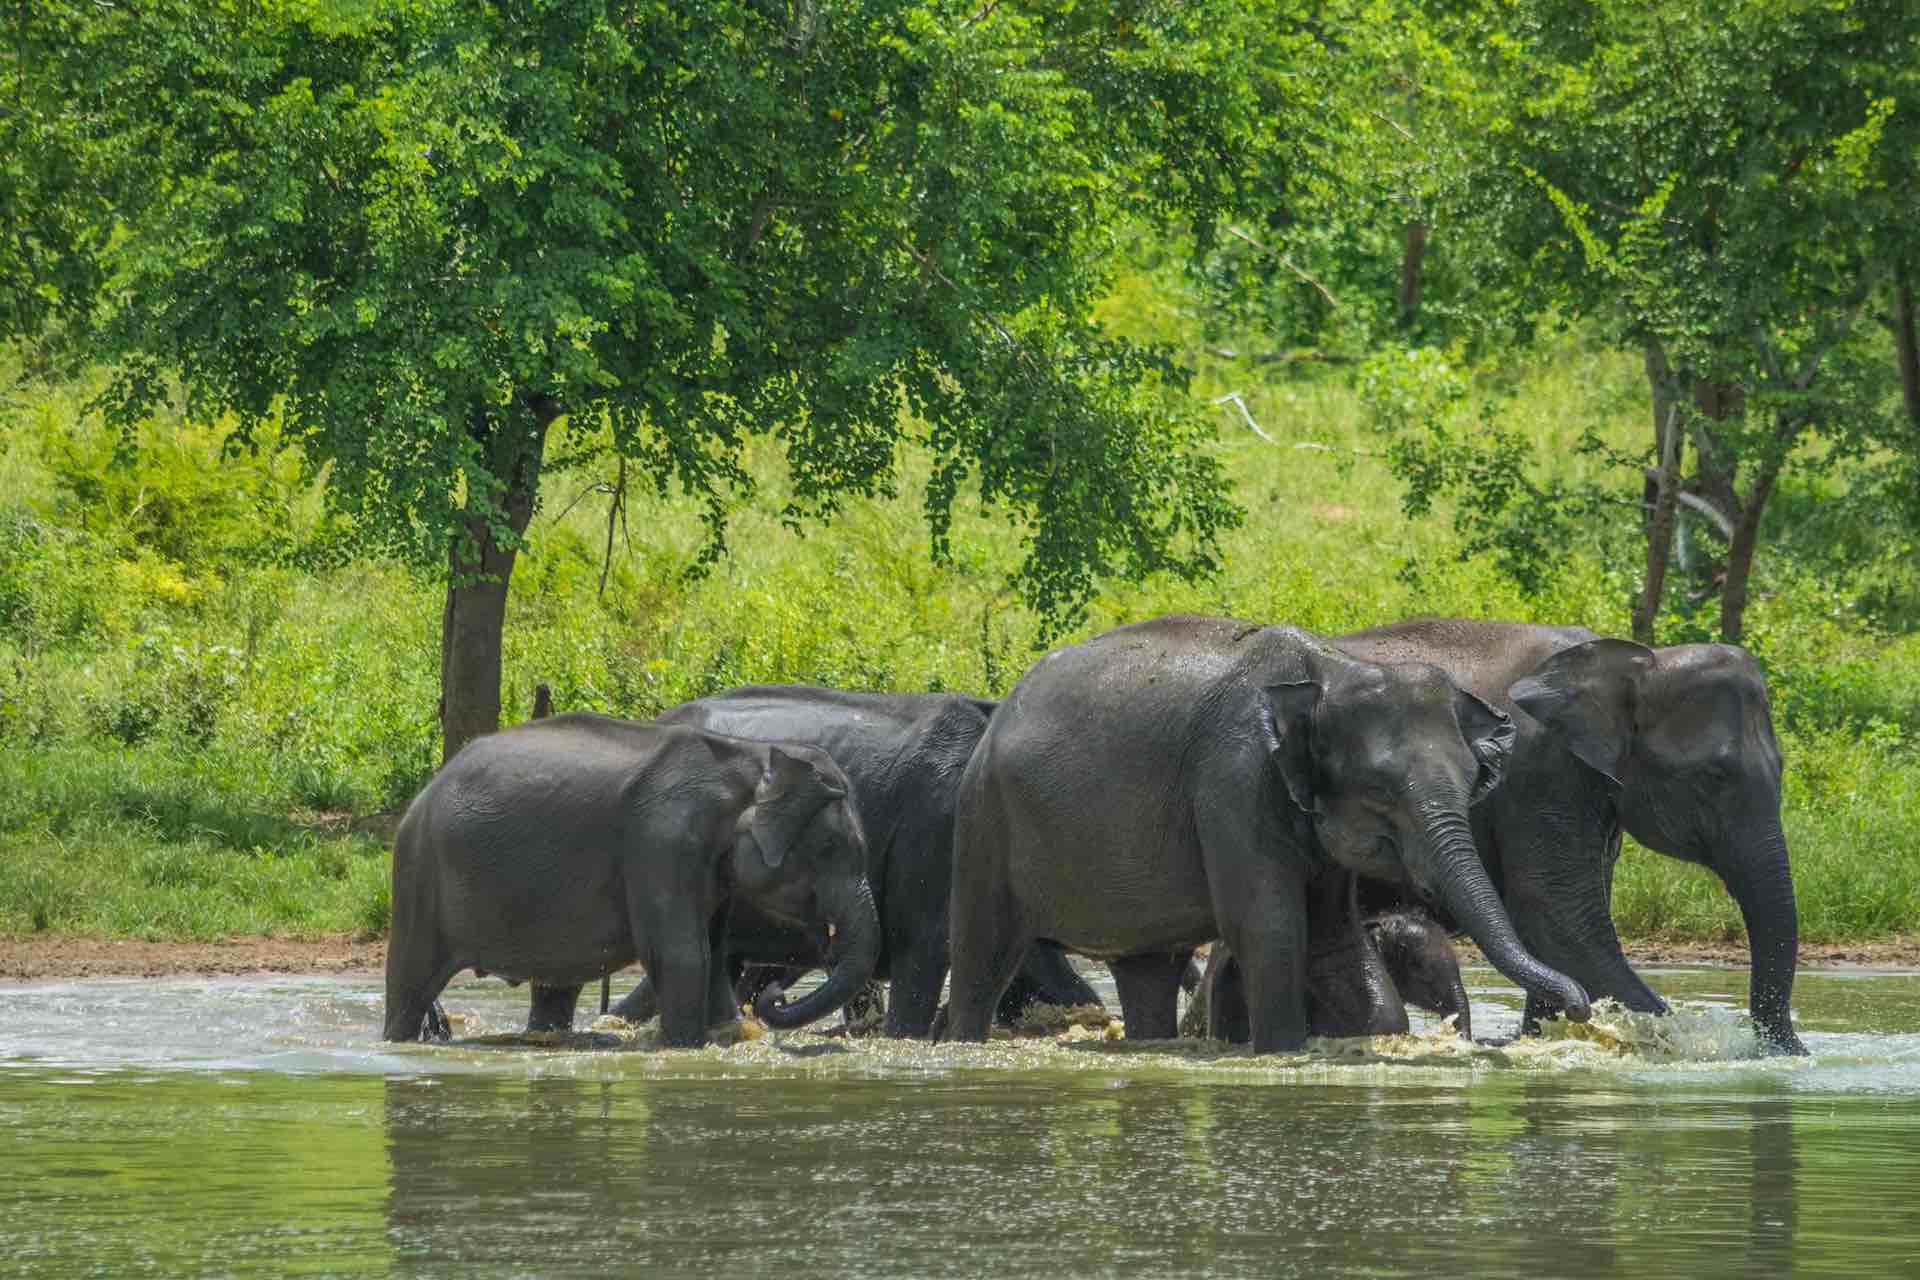 PM Modi calls for commitment to protecting elephants on World Elephant Day